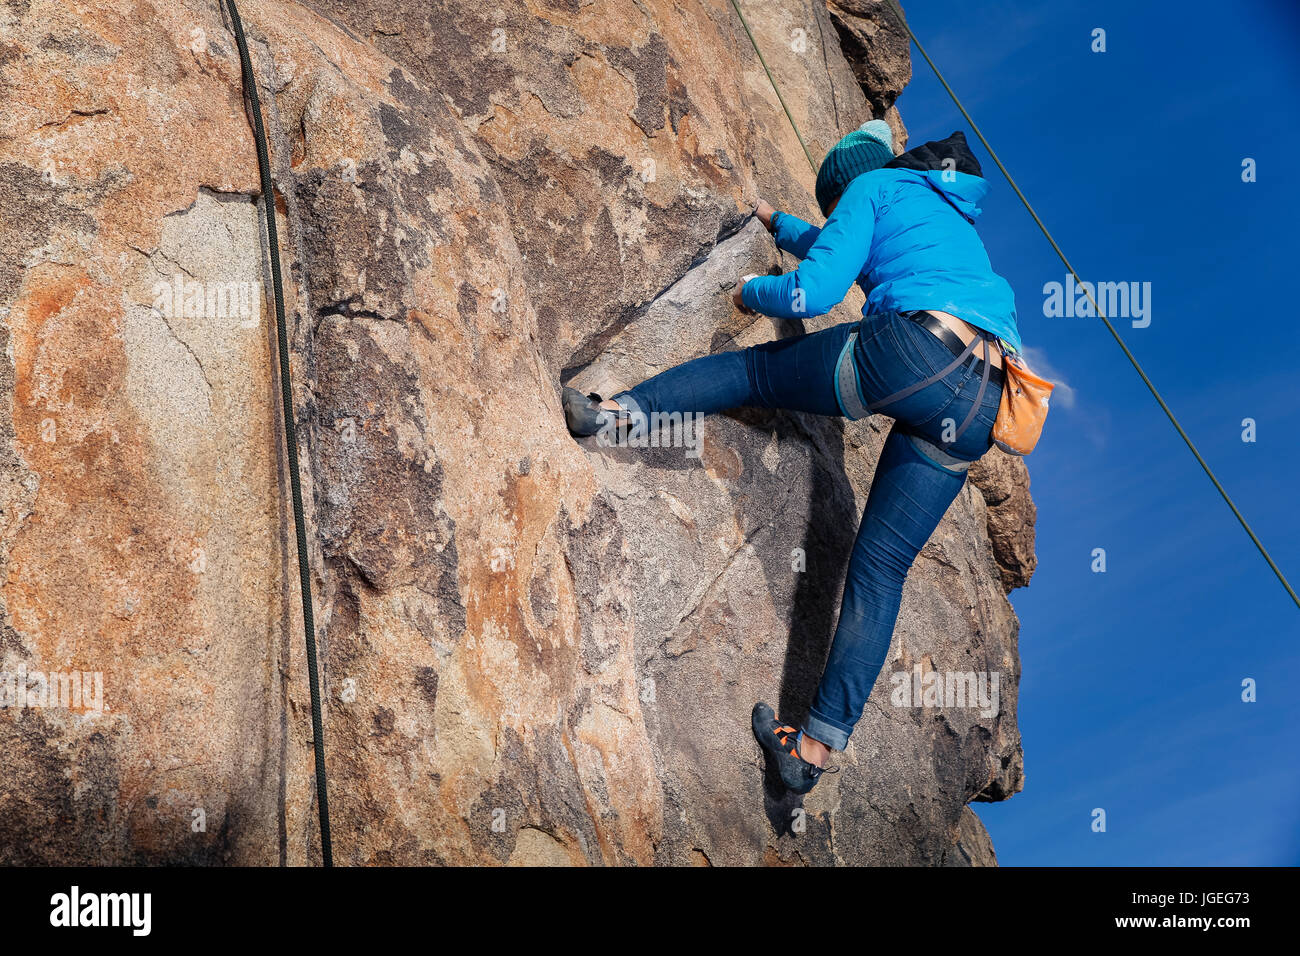 Young mixed race woman dressed for cold weather rock climbs in the desert Stock Photo